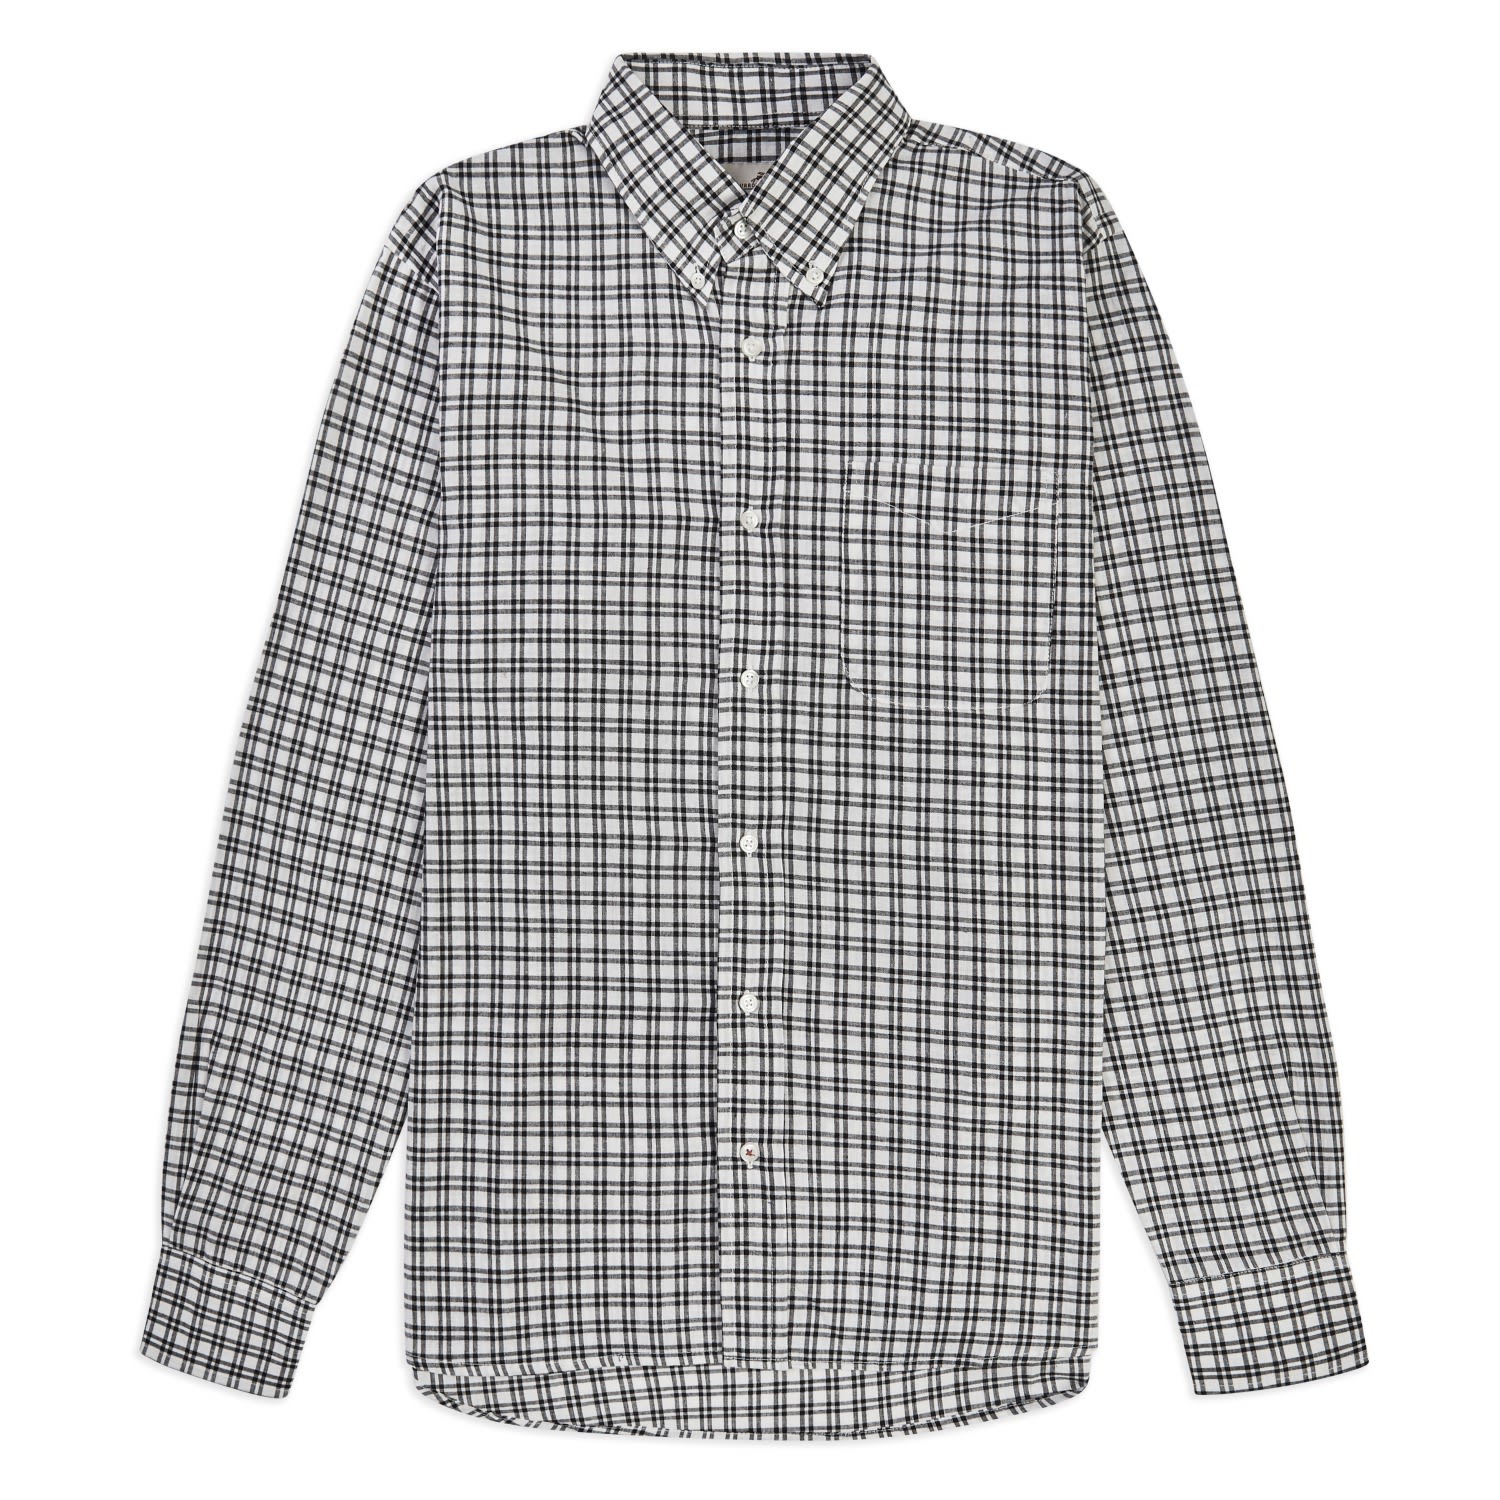 Burrows And Hare Men's Check Button Down Shirt - Black & White